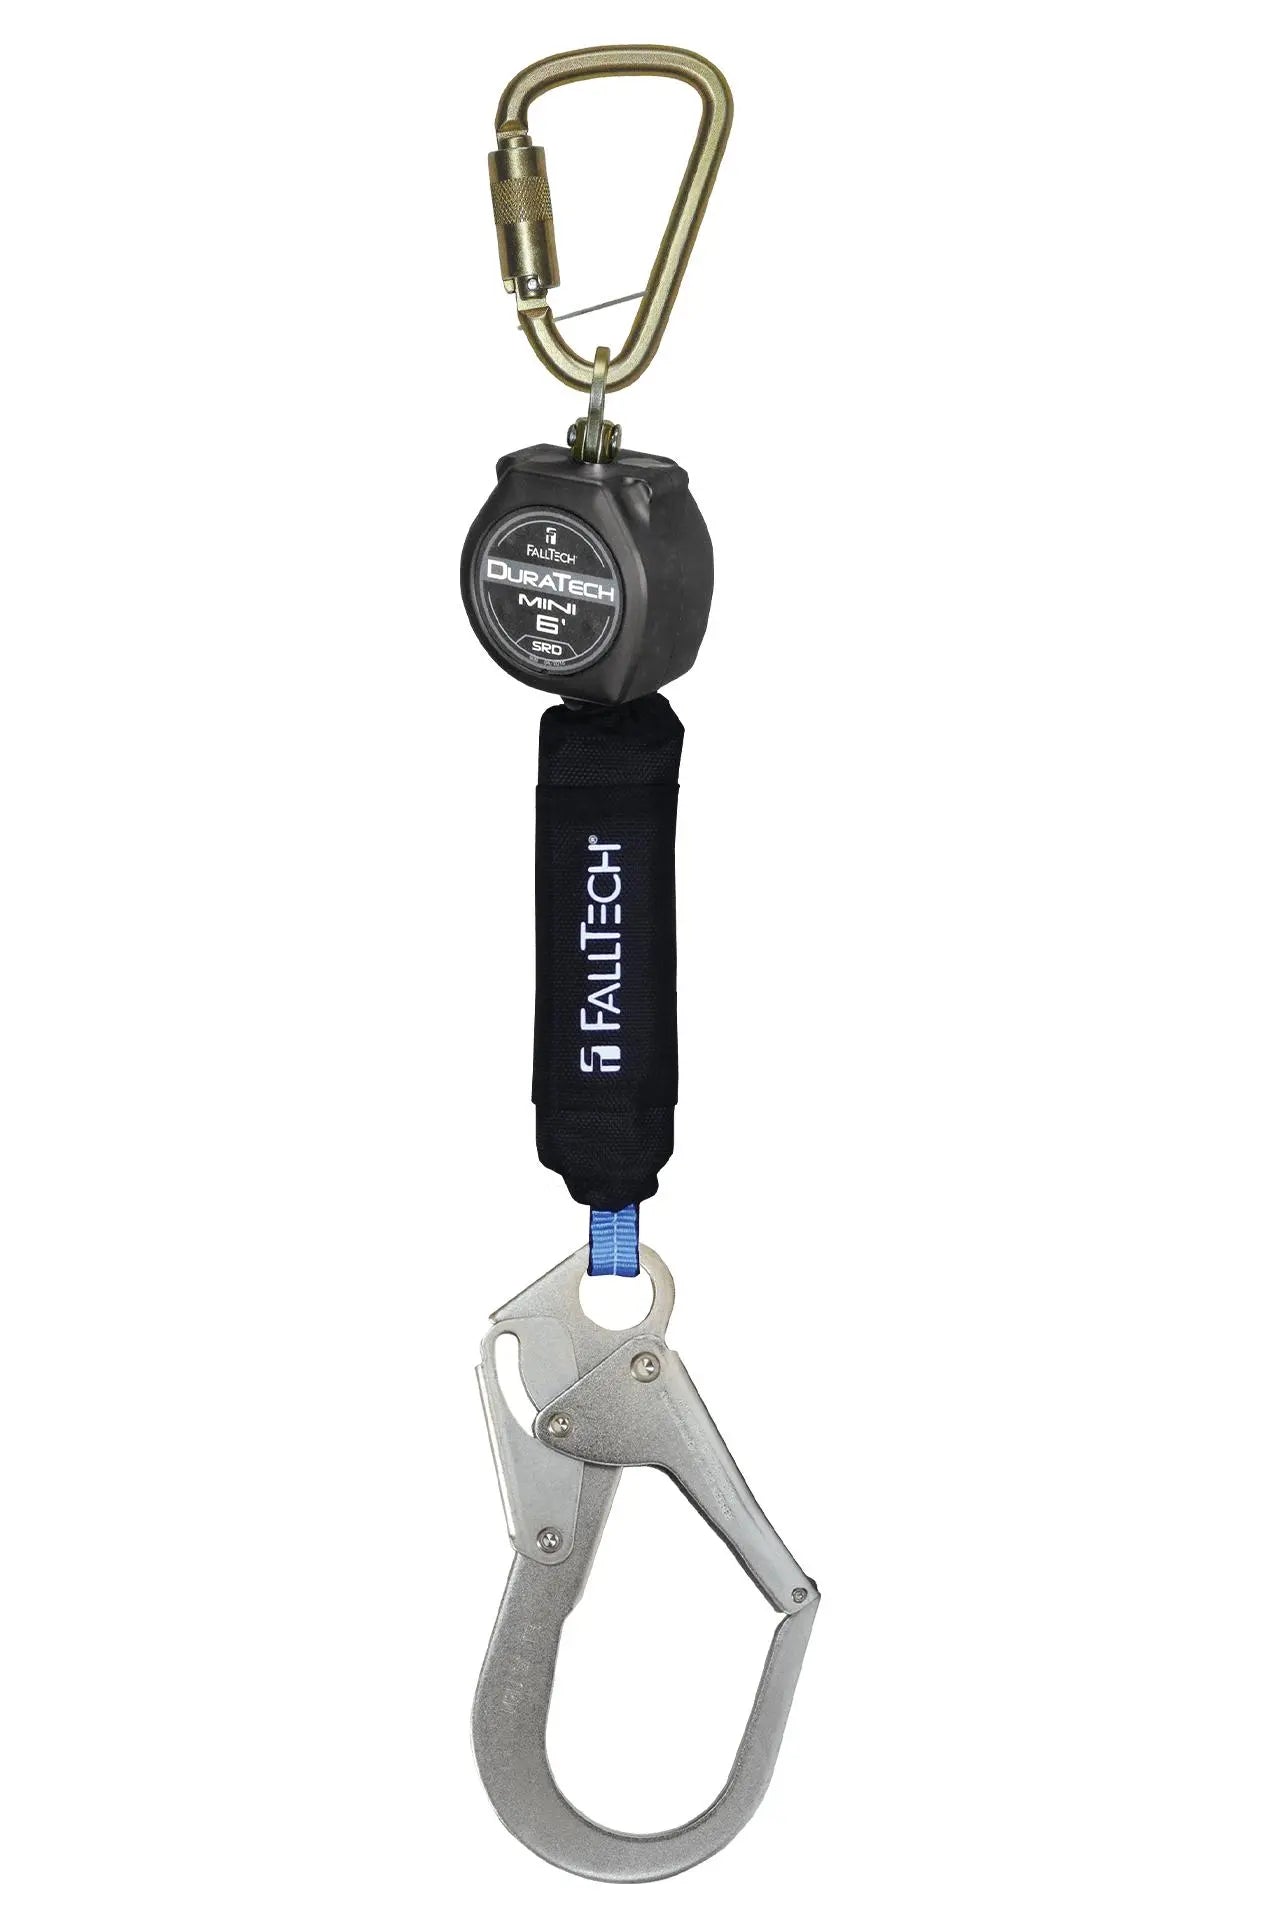 FallTech 6' Mini Personal SRL with Steel Rebar Hook, Includes Steel Dorsal Connecting Carabiner - Becker Safety and Supply